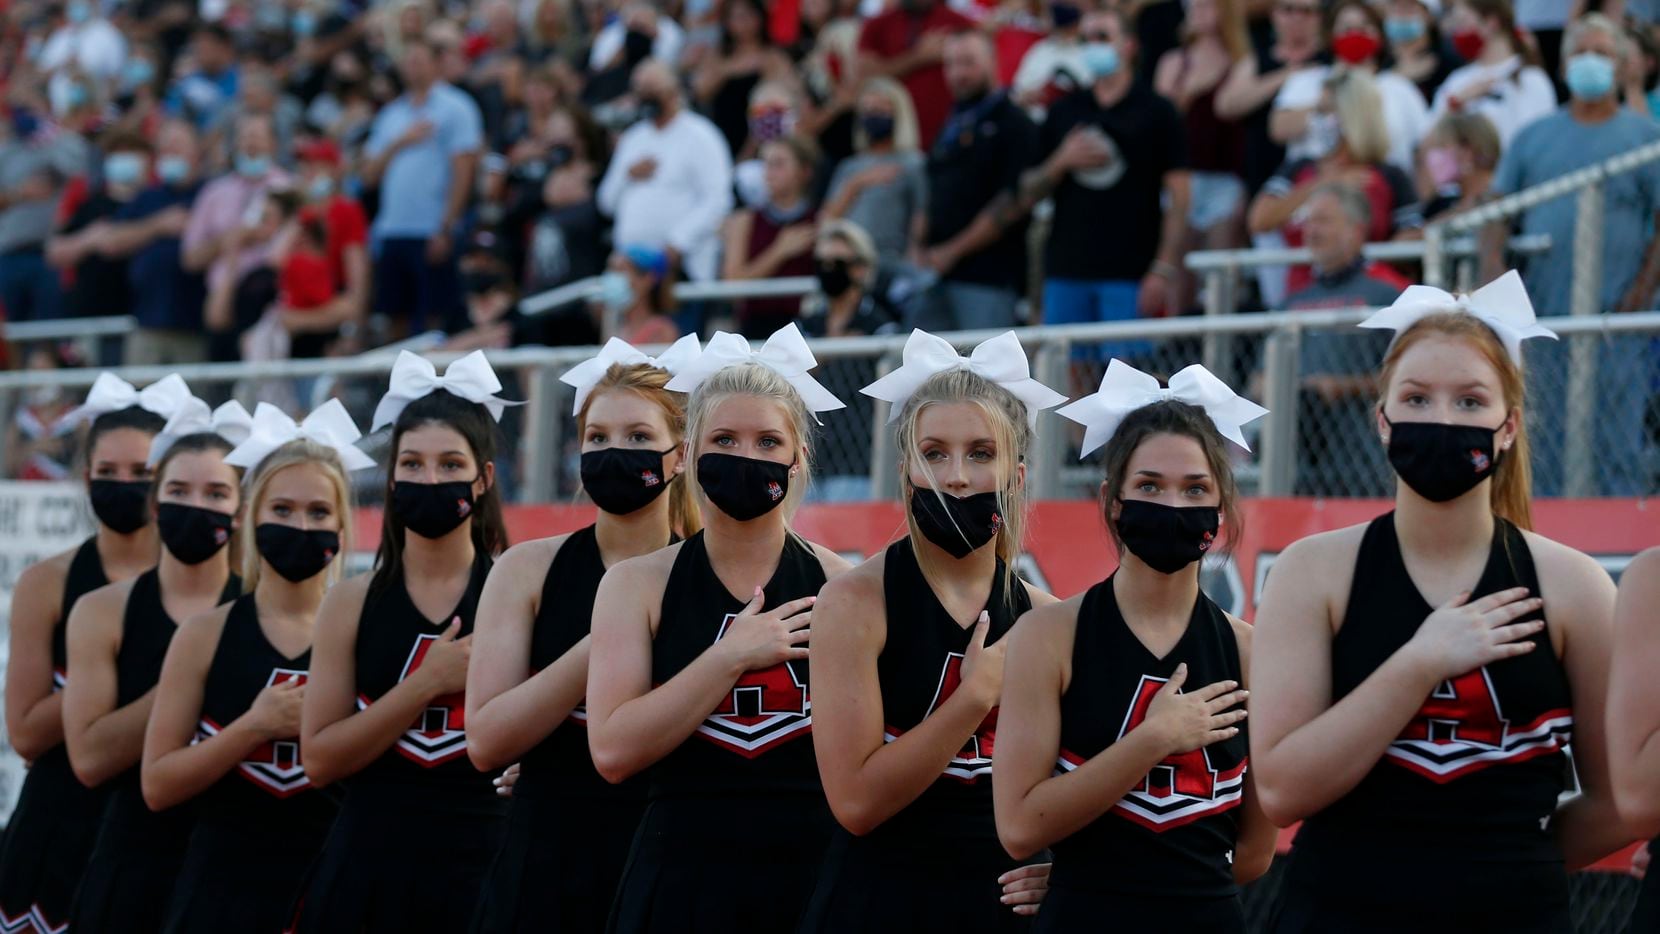 The Argyle cheerleaders and fans stand for the National Anthem during a high school football game against Decatur, in Argyle, Tx, on August 28, 2020. (Michael Ainsworth/Special Contributor)